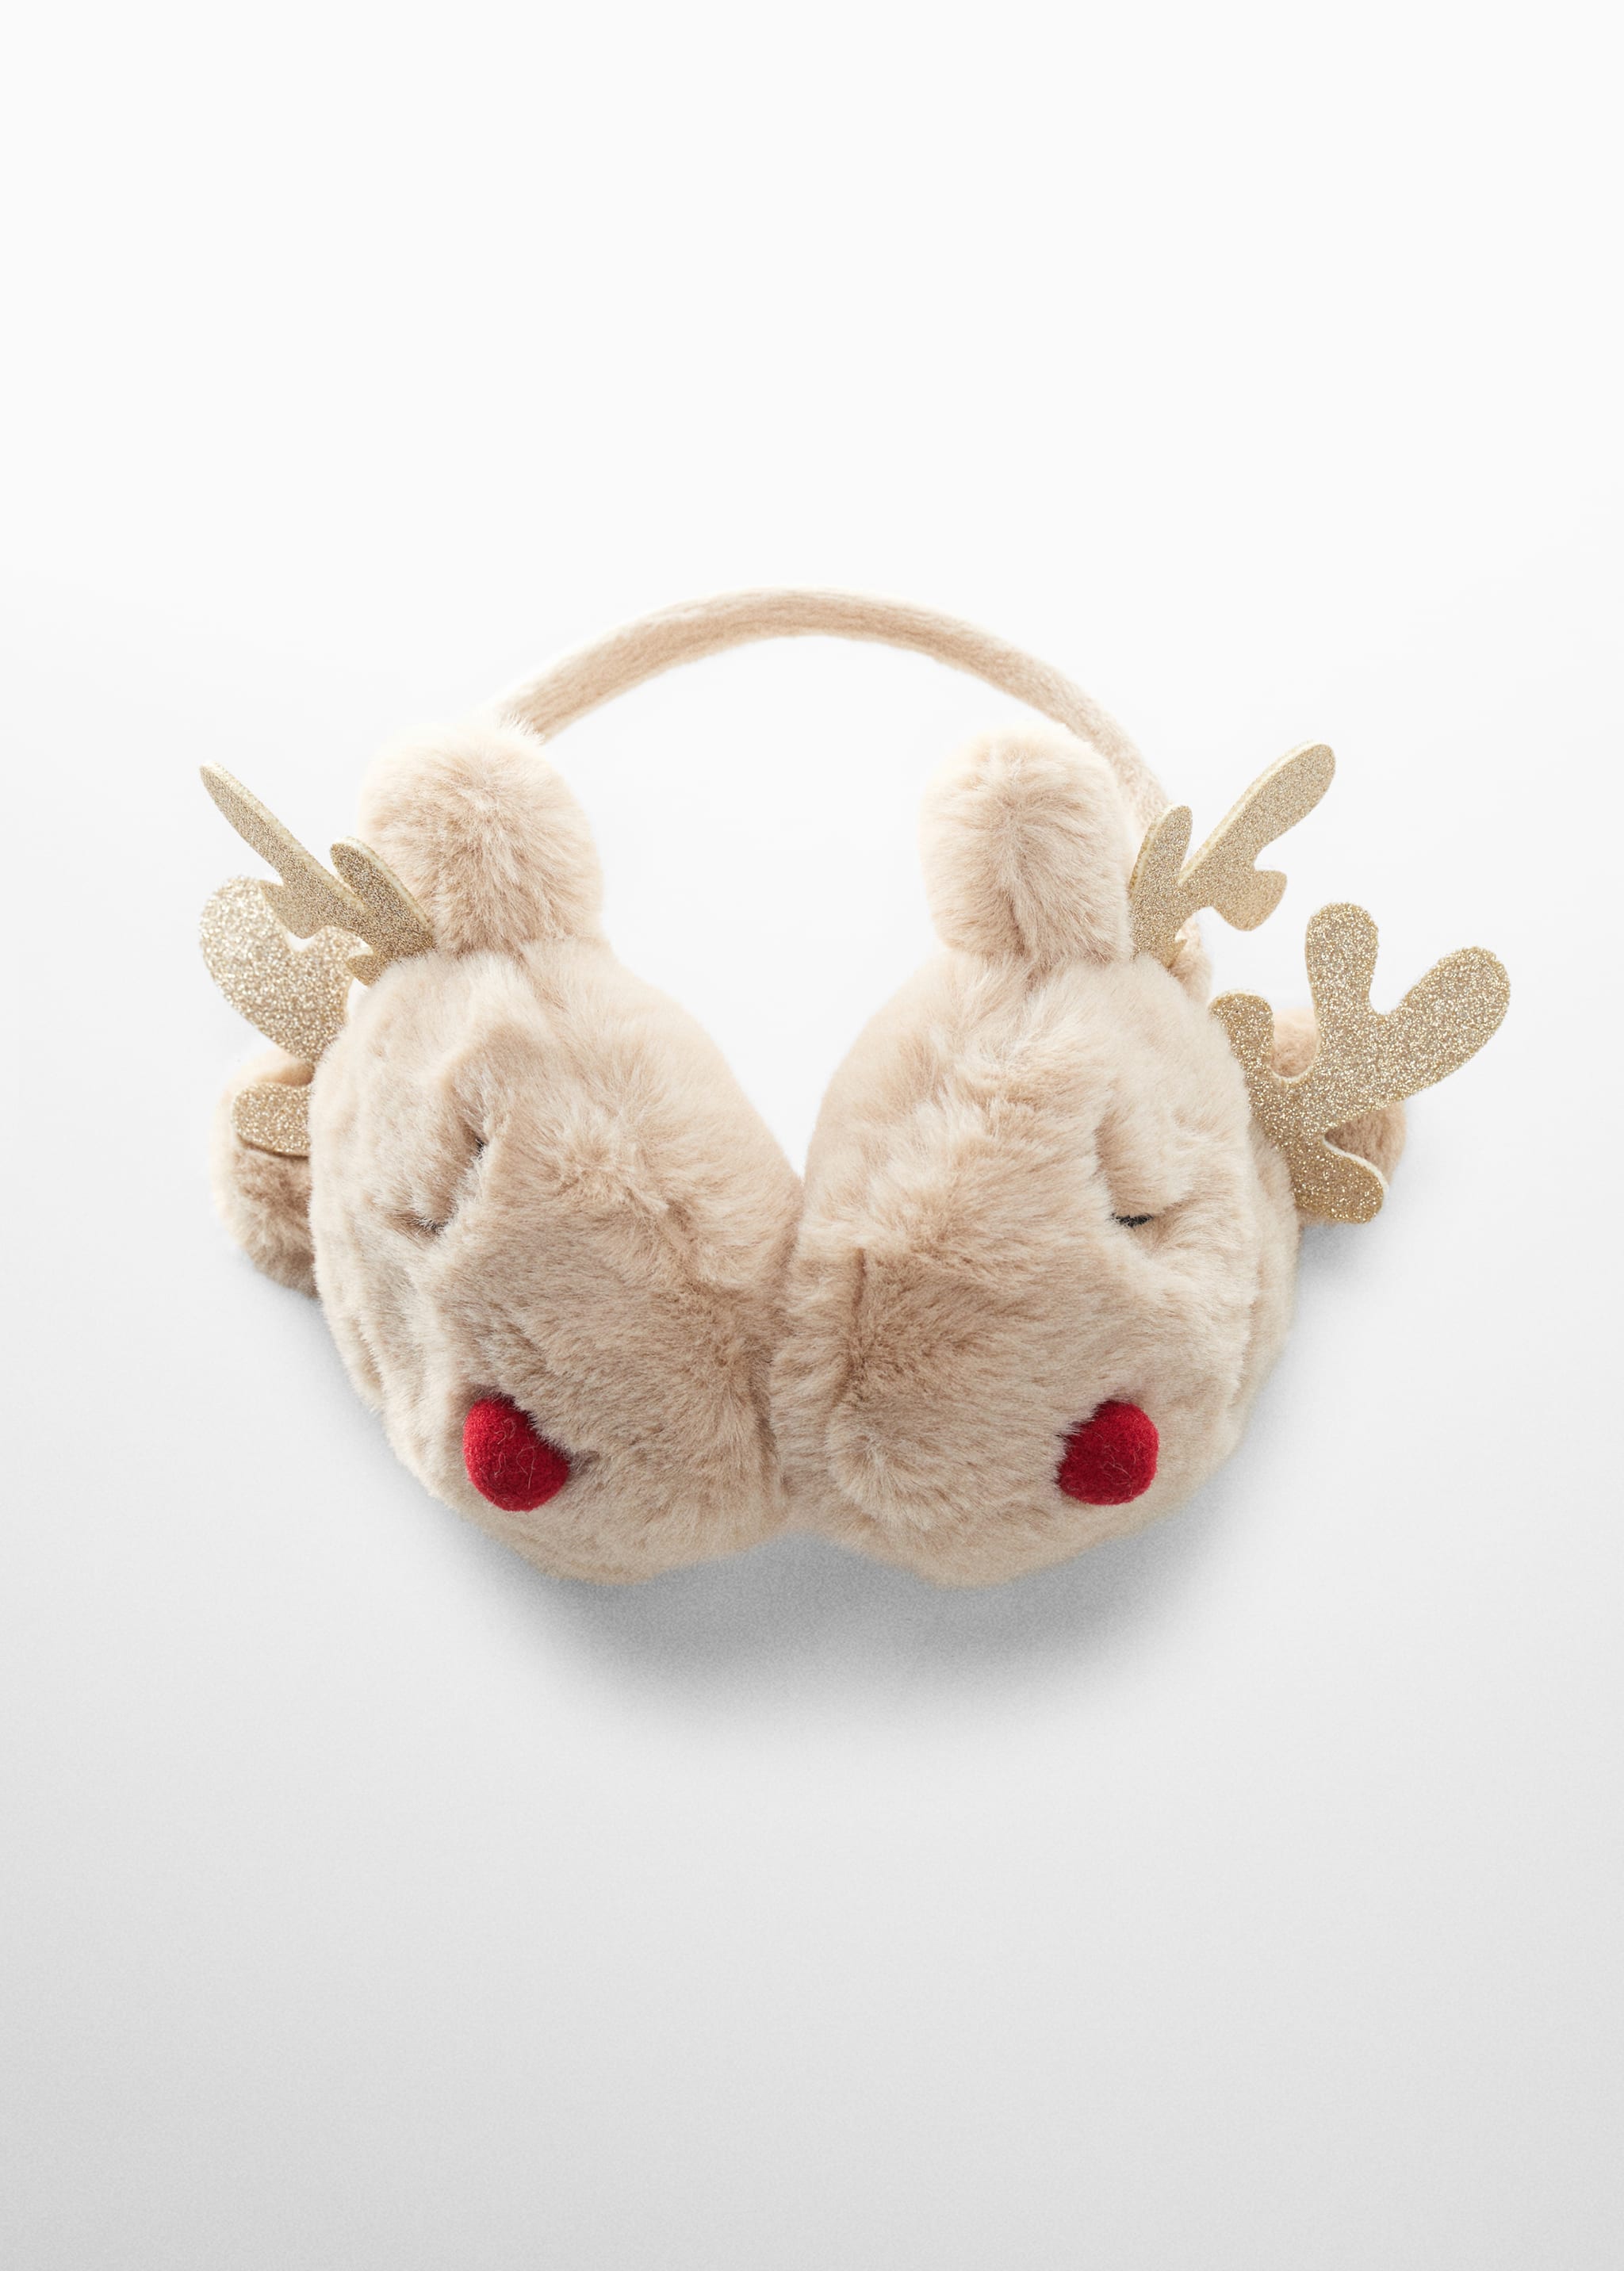 reindeer earmuffs - Article without model